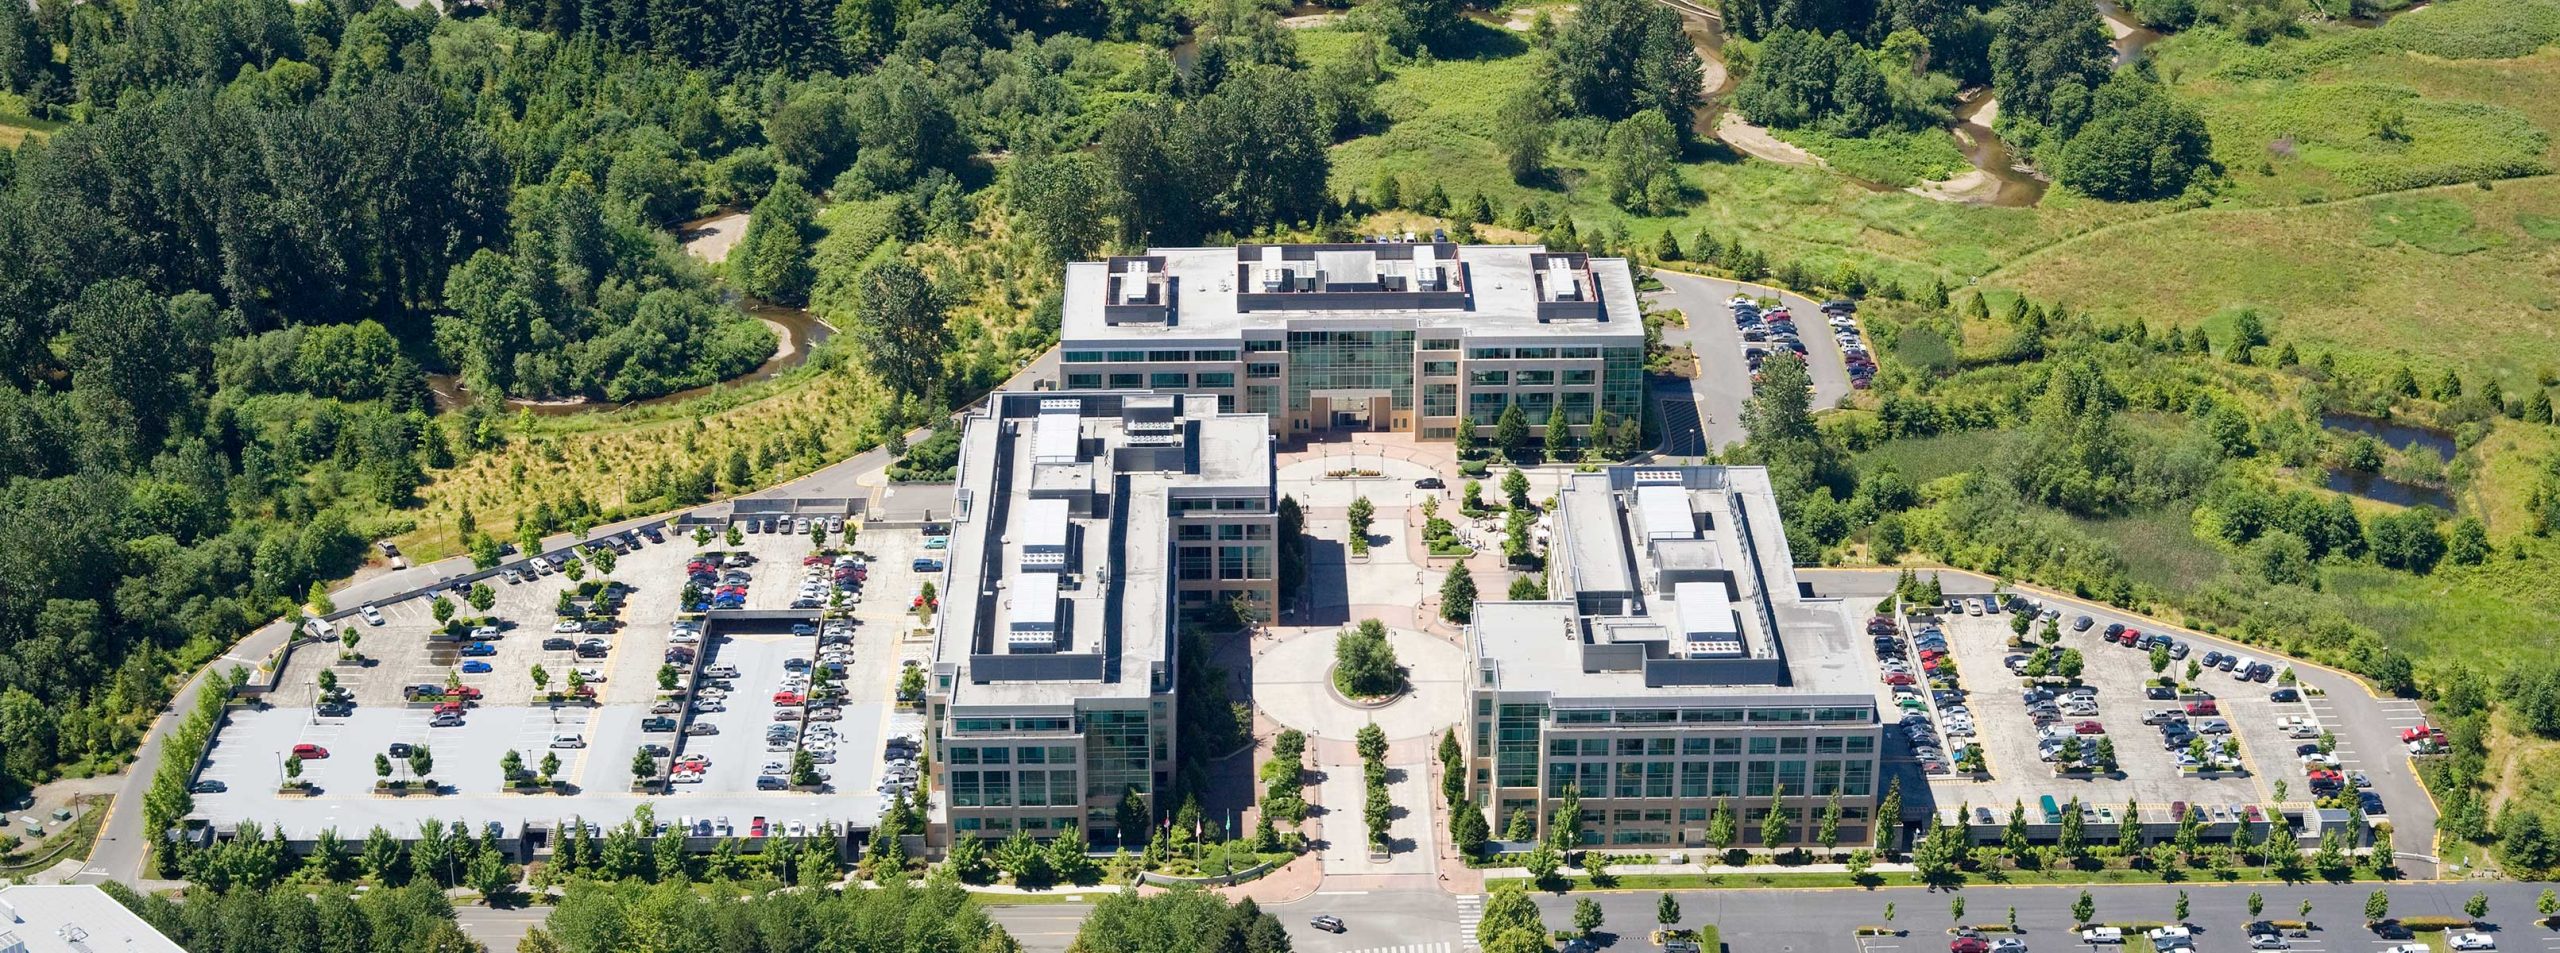 aerial view of sammamish parkplace